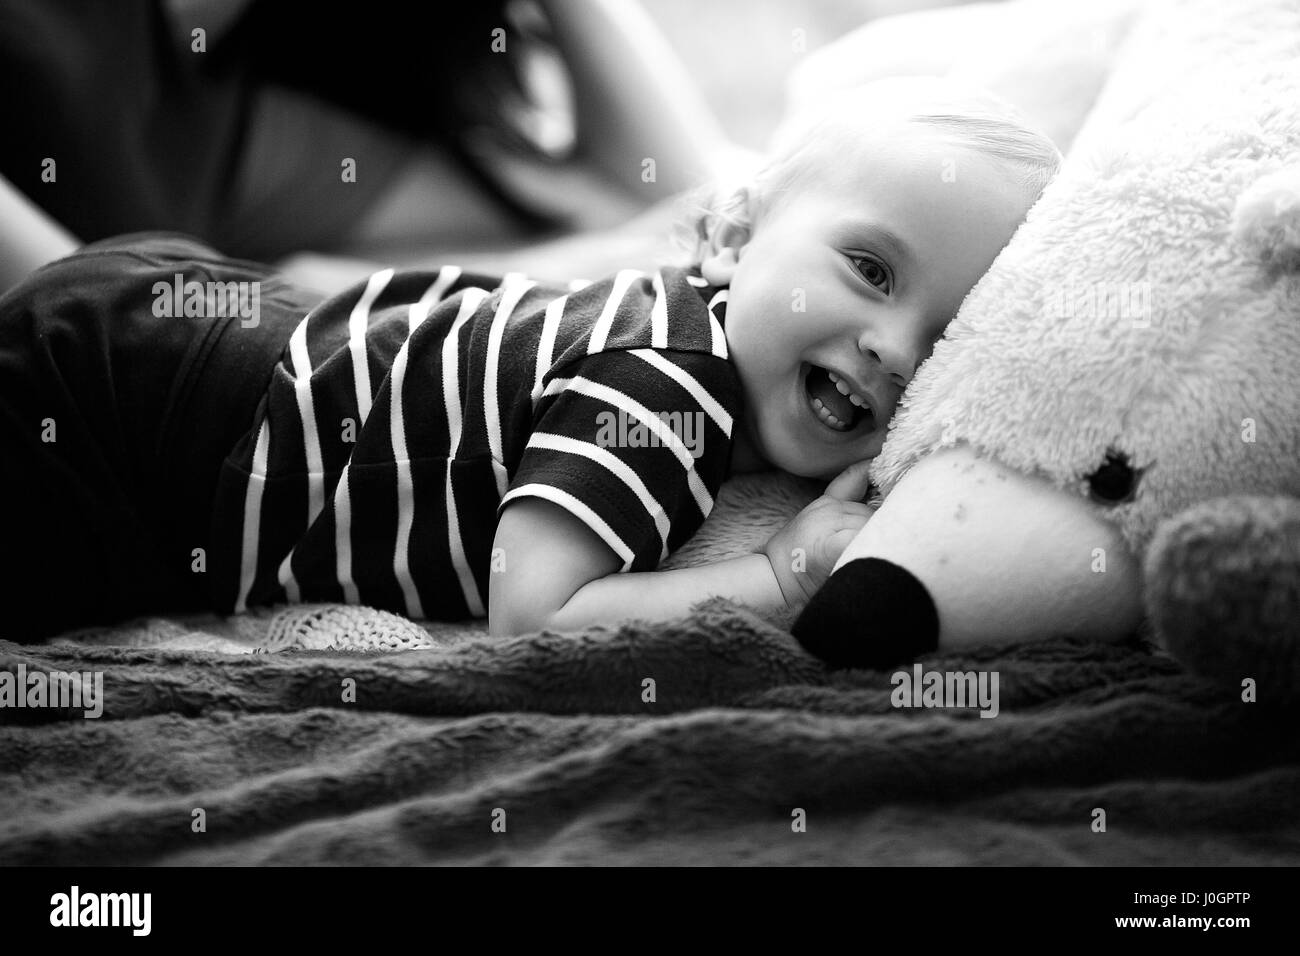 Small baby lies on bed next to teddy bear and laughs. Black and white image. Stock Photo